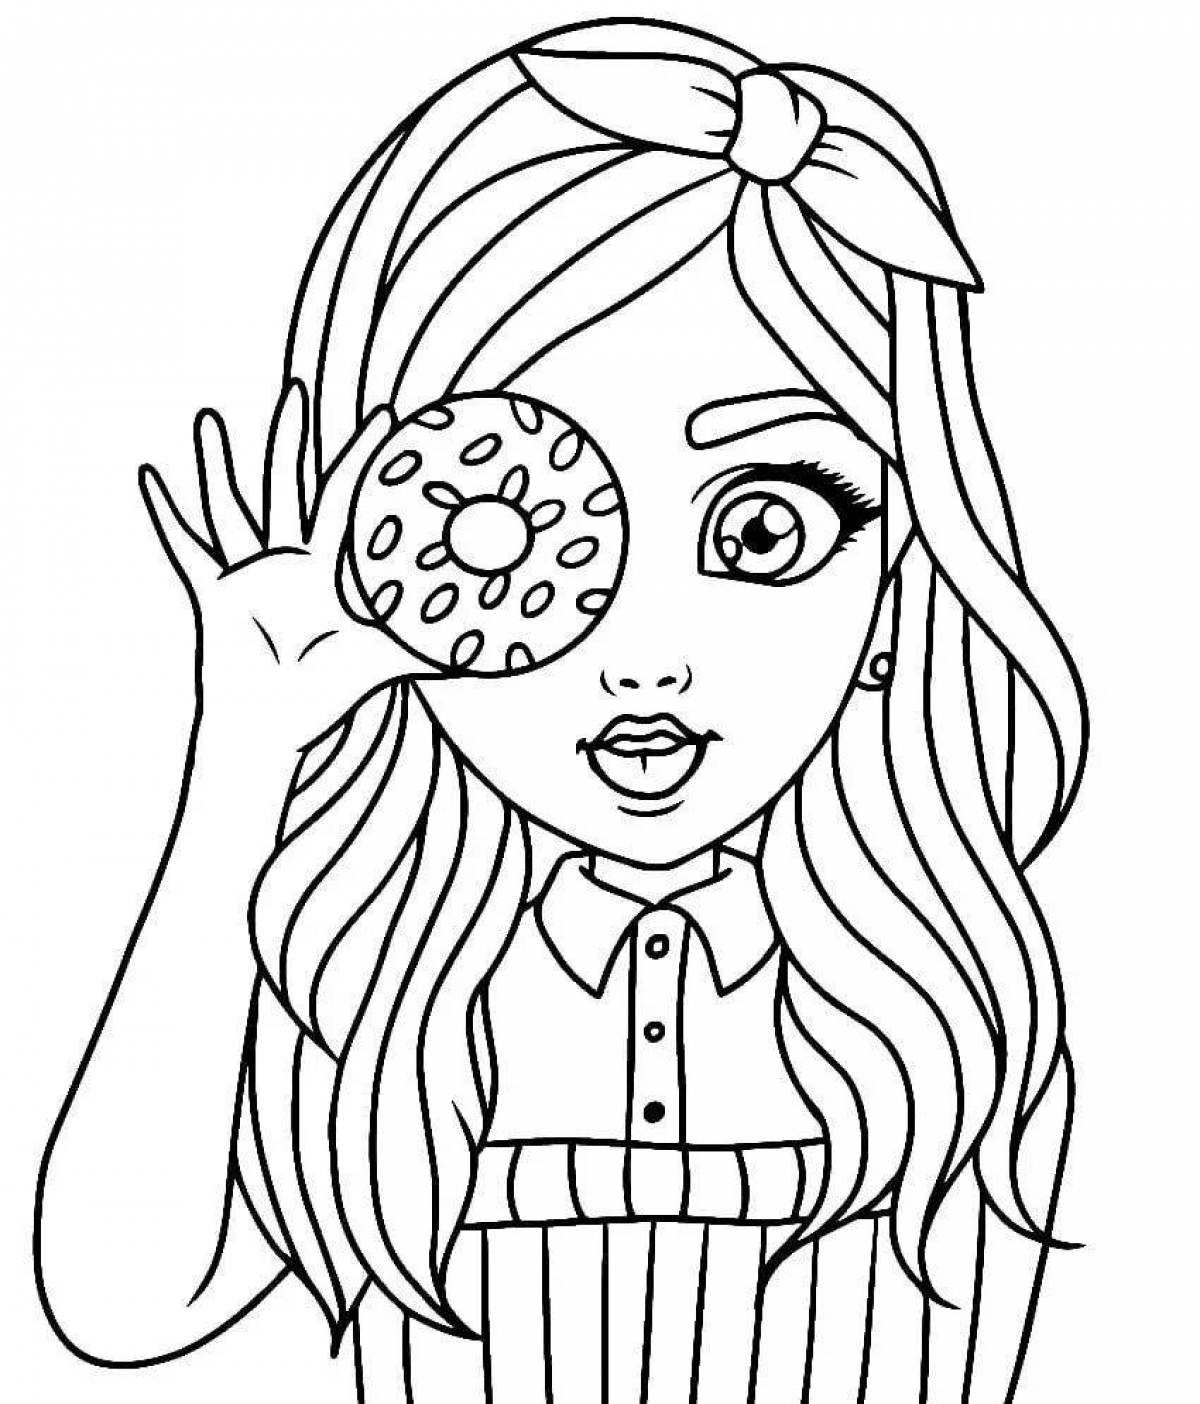 Inspirational coloring book for cool bloggers